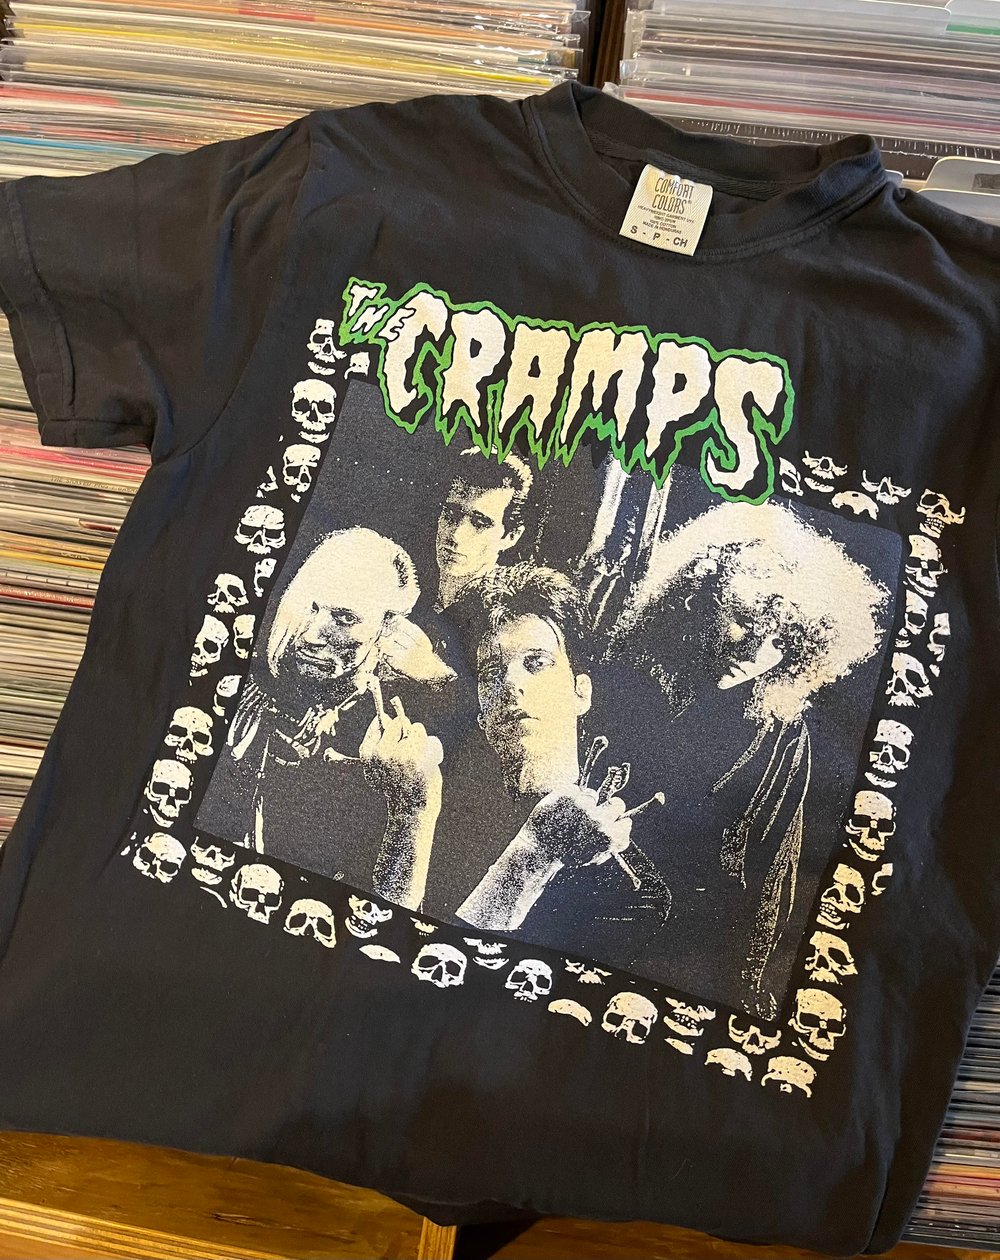 THE CRAMPS T-Shirt